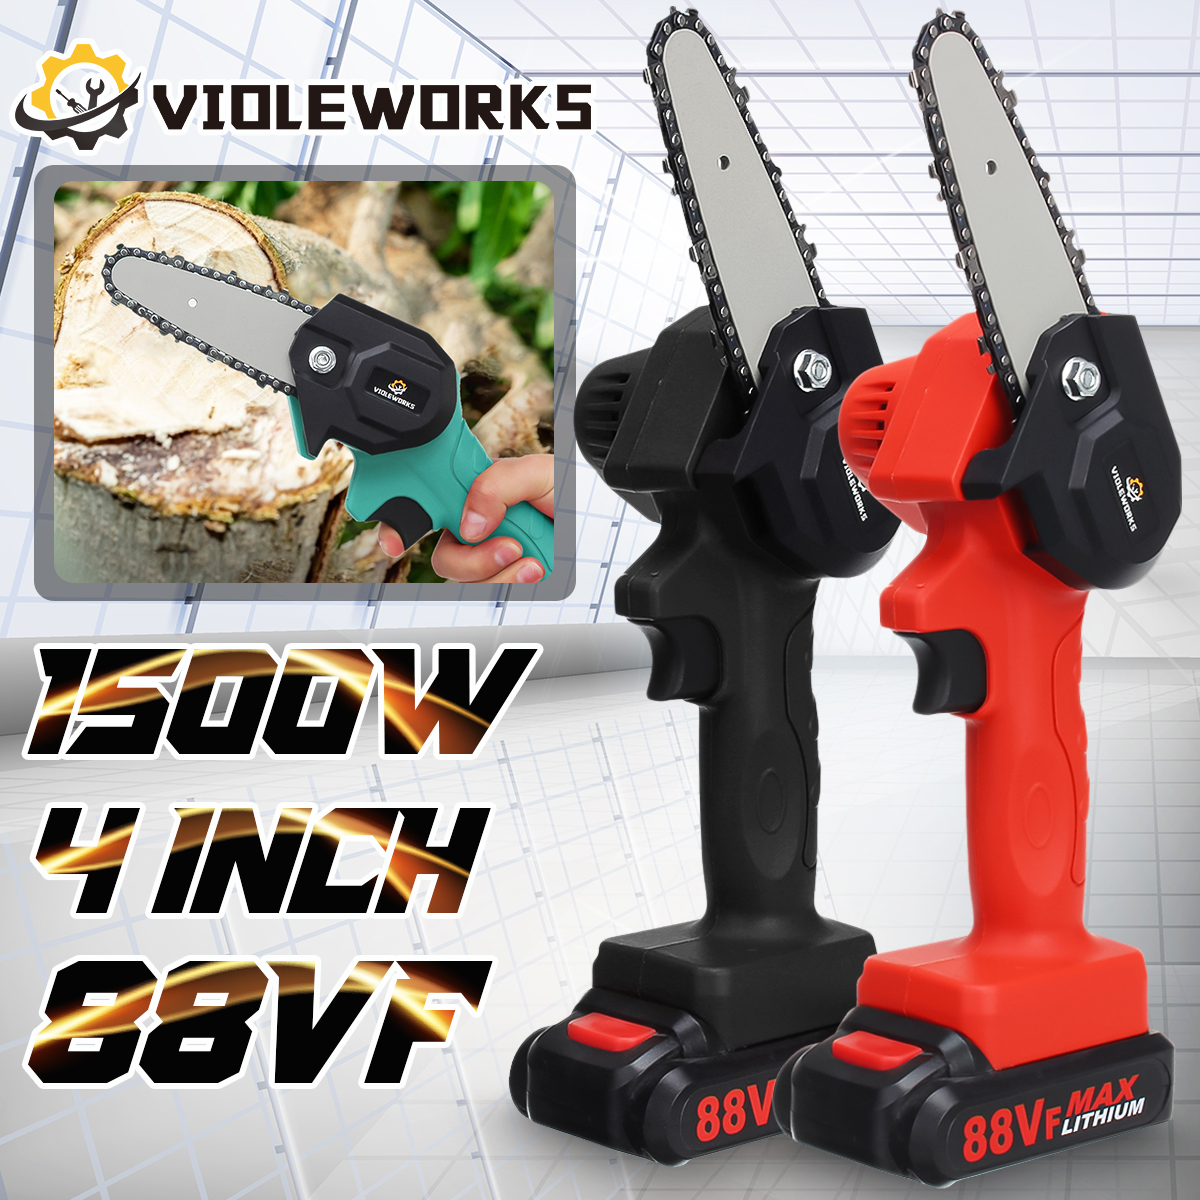 VIOLEWORKS-4-Inch-88VF-Cordless-Electric-Chain-Saw-1500W-One-Hand-Saw-Woodworking-Wood-Cutter-W-12-B-1868917-1